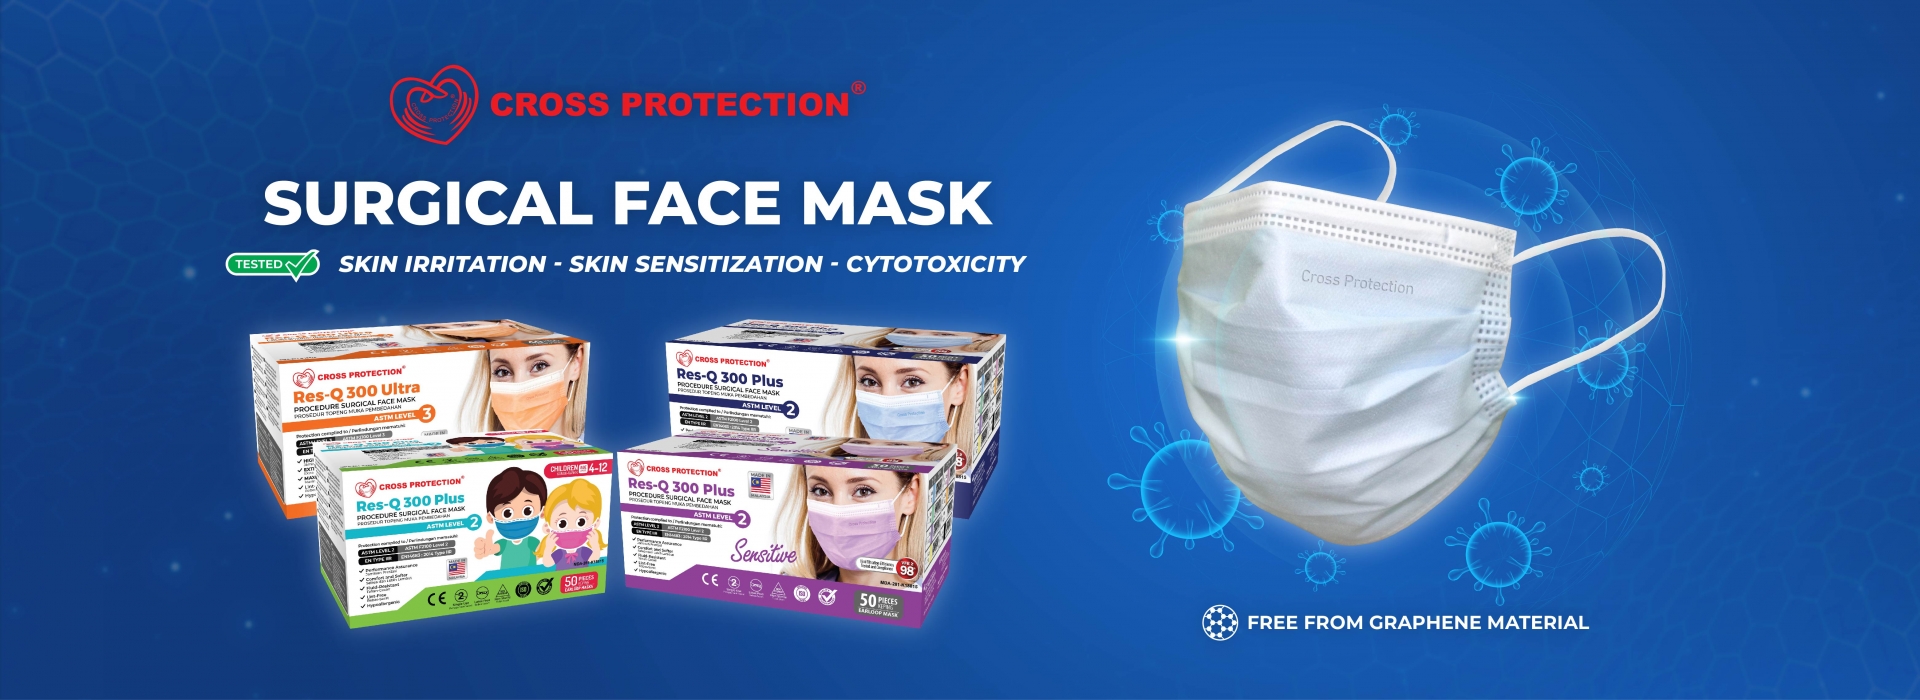 Cross Protection Face Mask Tested